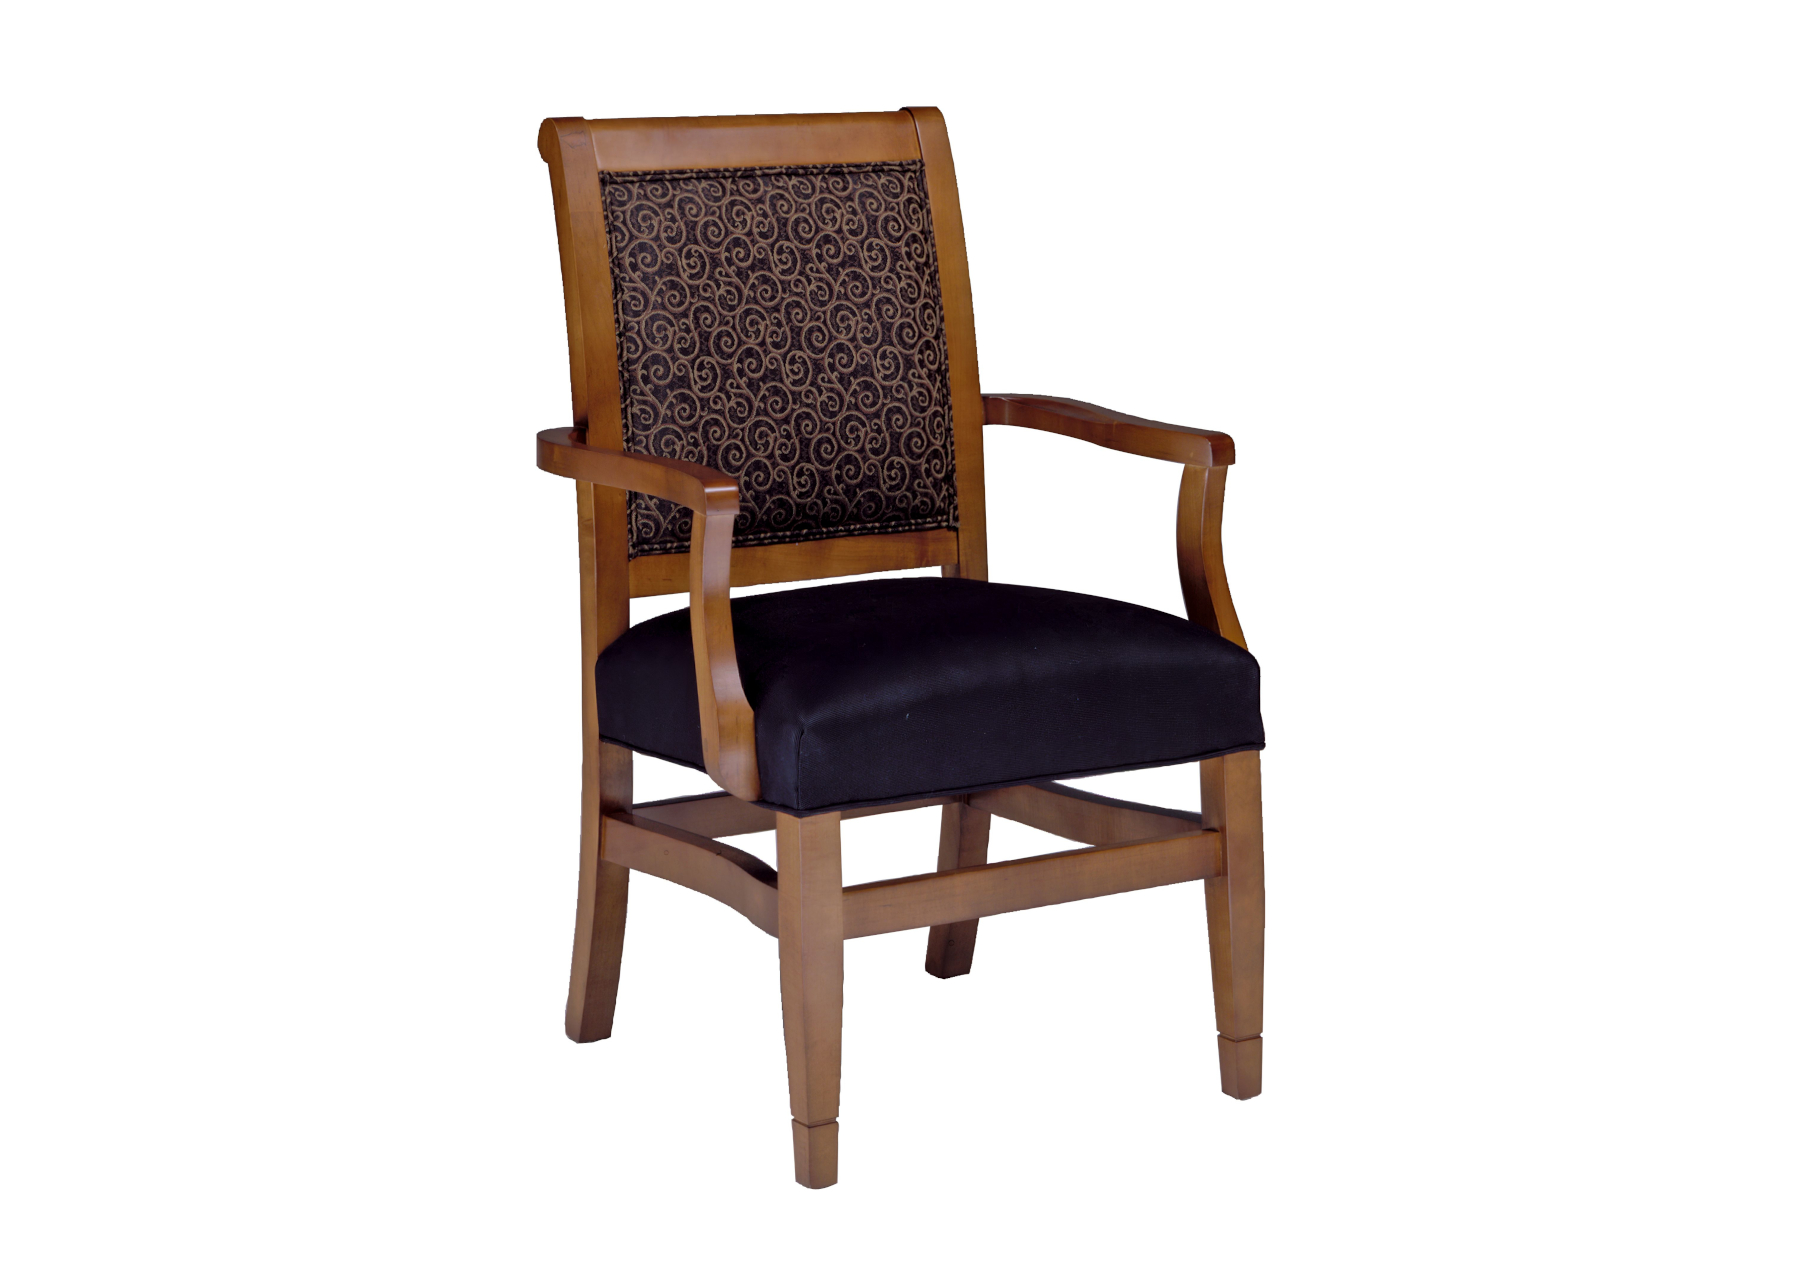  BEDFORD STACKING ARM CHAIR